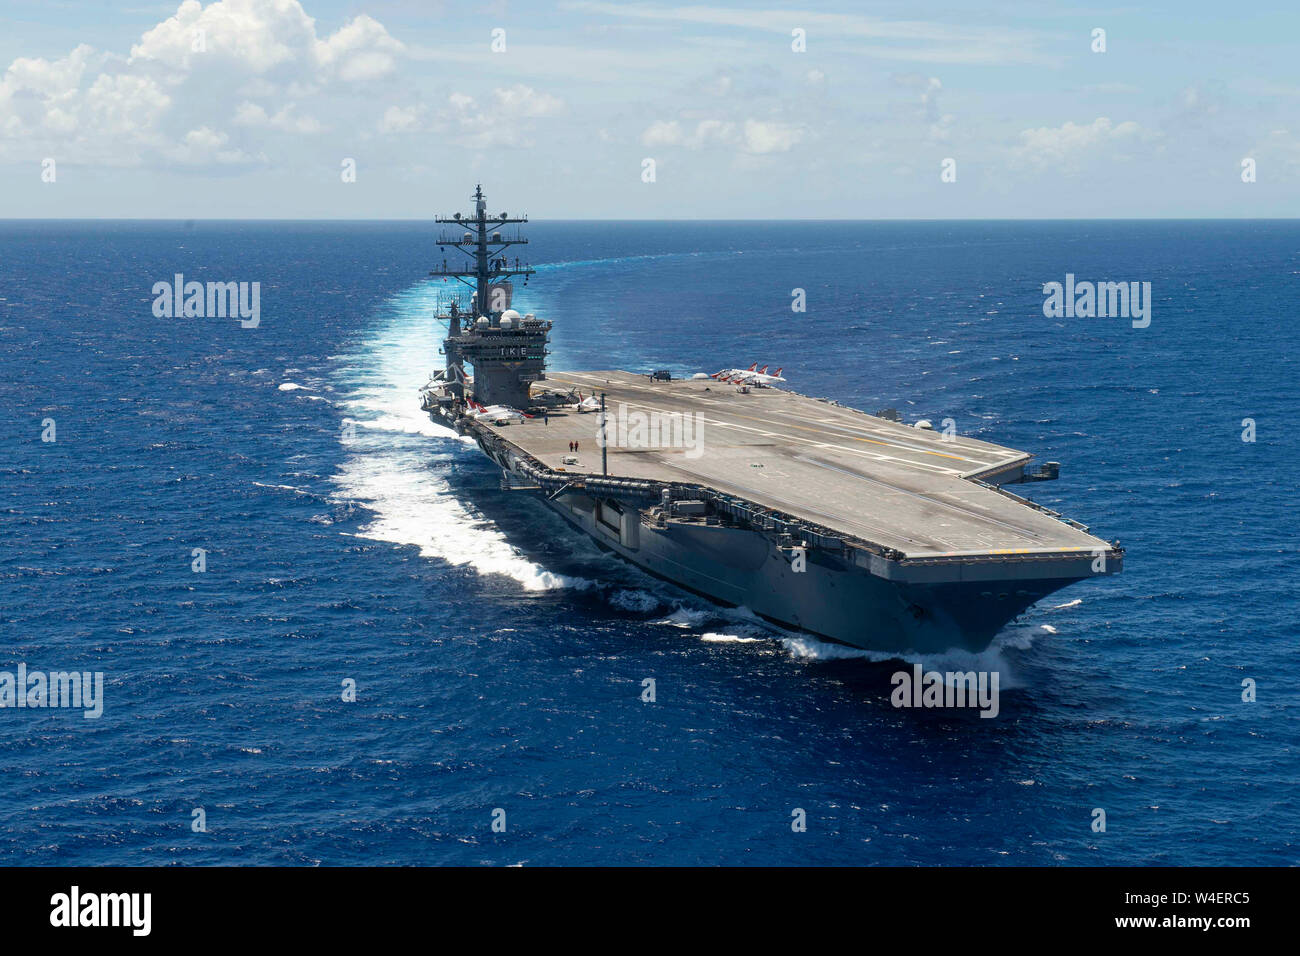 The aircraft carrier USS Dwight D. Eisenhower (CVN 69) transits the Atlantic Ocean, July 16, 2019. Ike is underway in the Atlantic Ocean conducting carrier qualifications while in the basic phase of the Optimized Fleet Response Plan. (U.S. Navy photo by Mass Communication Specialist 3rd Class Sawyer Haskins) Stock Photo